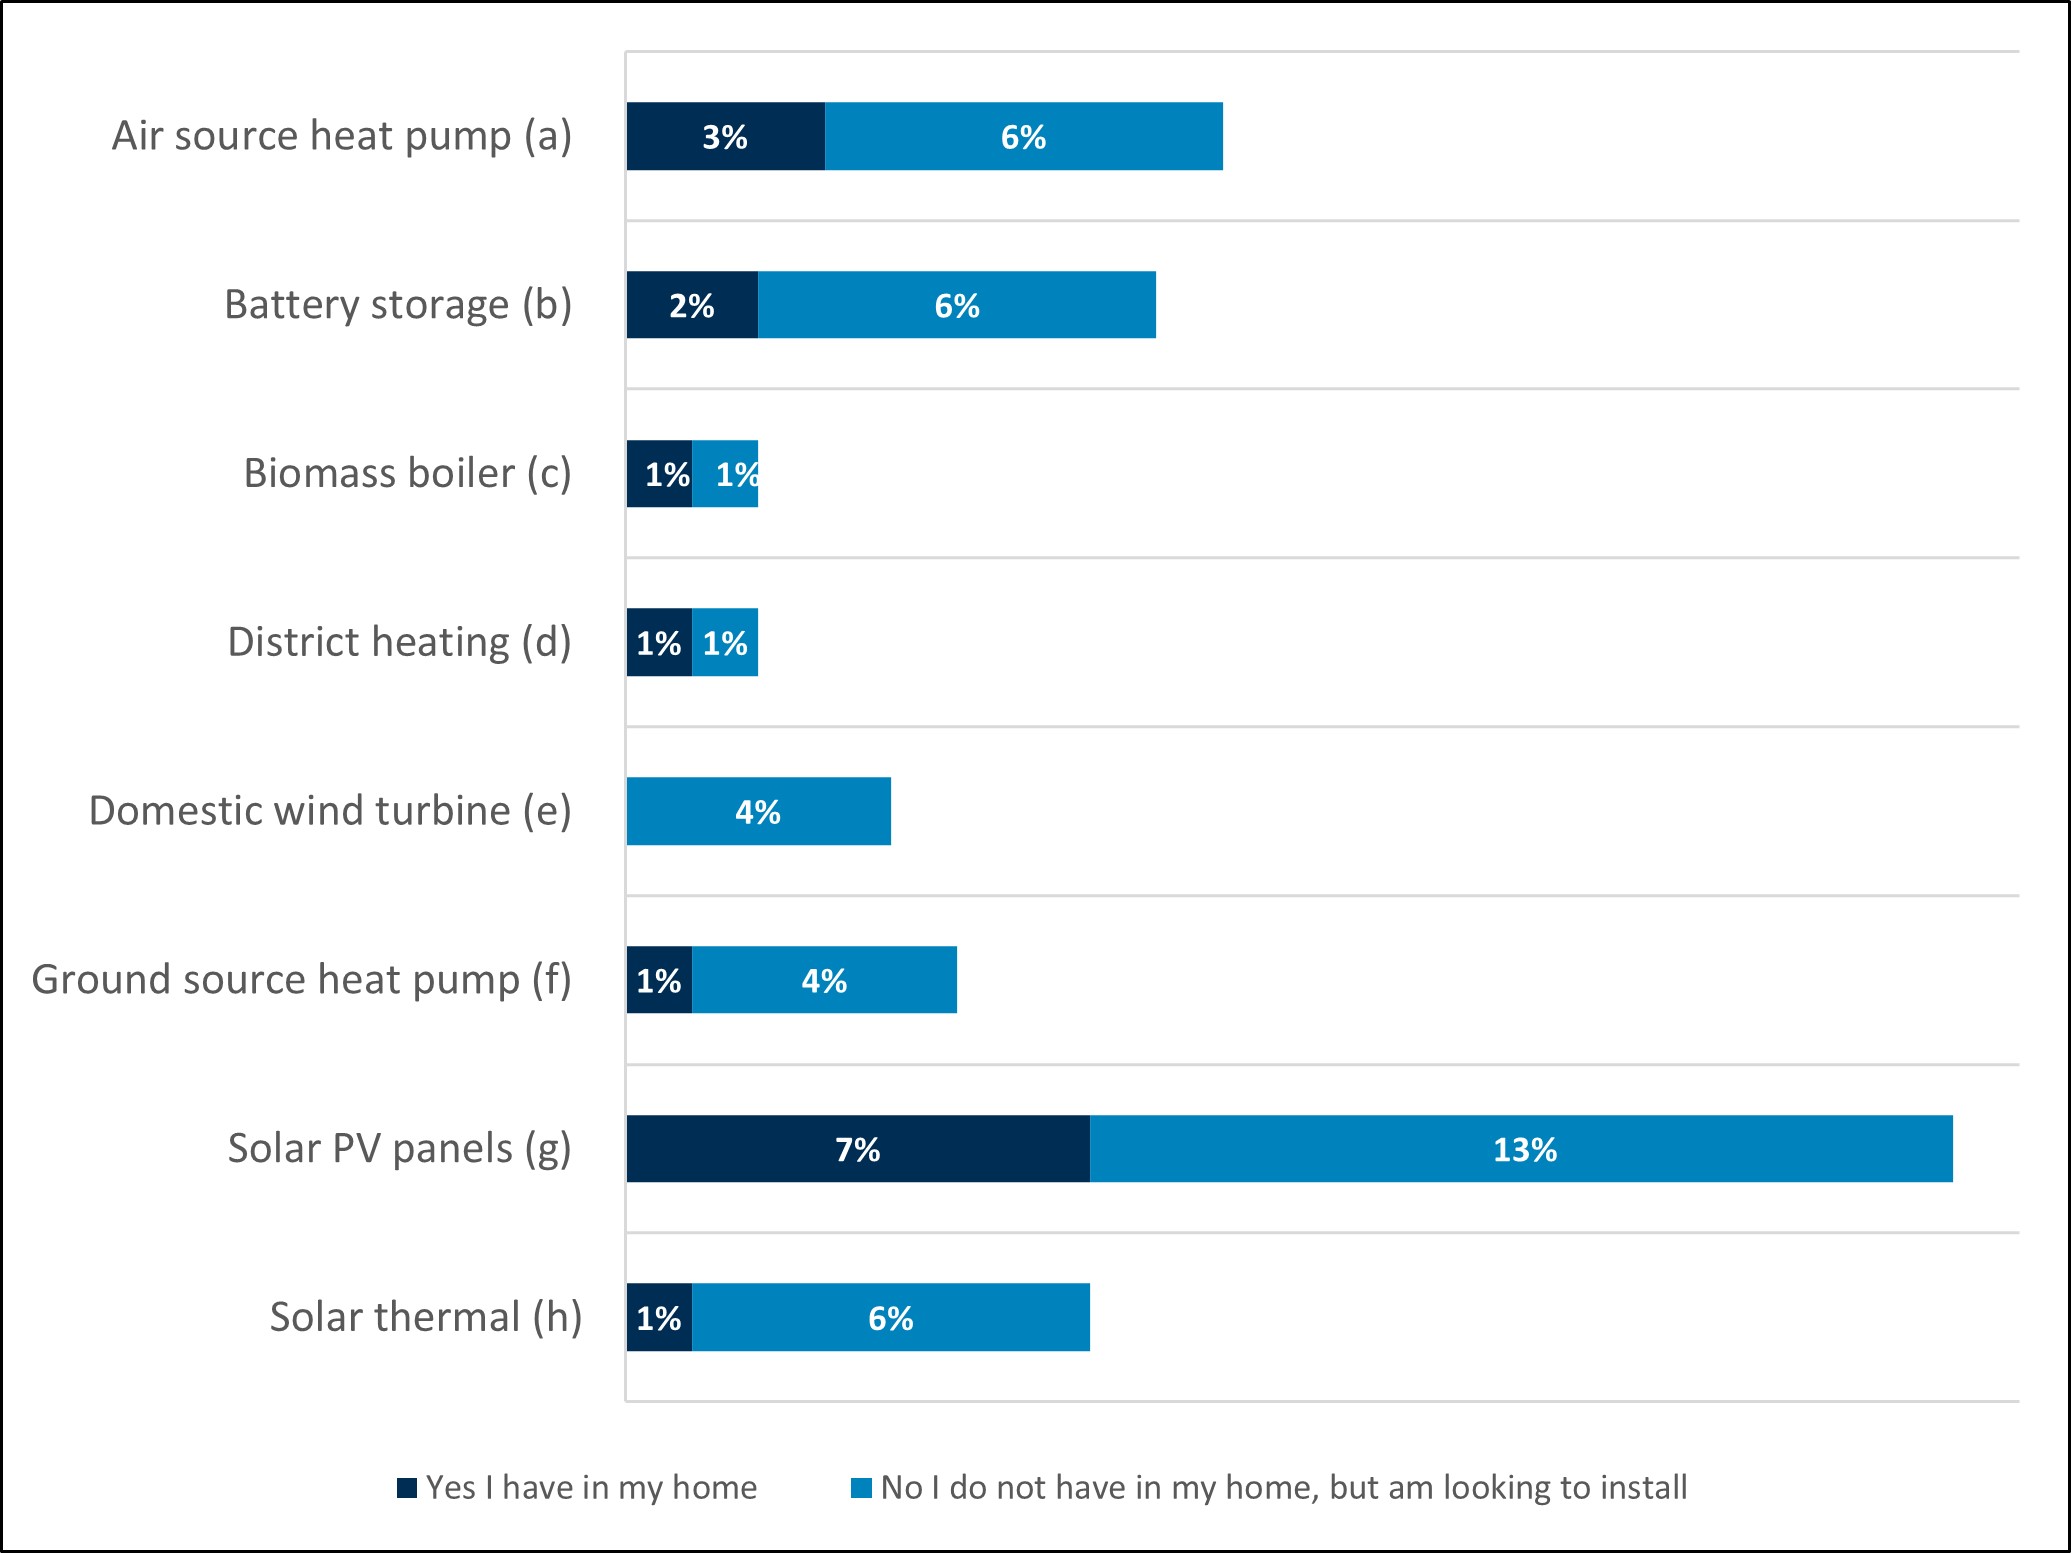 Data showing that 7% of respondents stated they have solar PV panels, with a  further 13% looking to install these in the future. 2% have battery storage, with 6% looking to install these in the future. 1% have solar thermal, with 6% looking to install in the future, 1% have district heating, with 1% looking to install in the future. 1% have biomass boilers, with 1% looking to install in the future. No one in the survey currently has a domestic wind turbine, but 4% are looking to install in the future